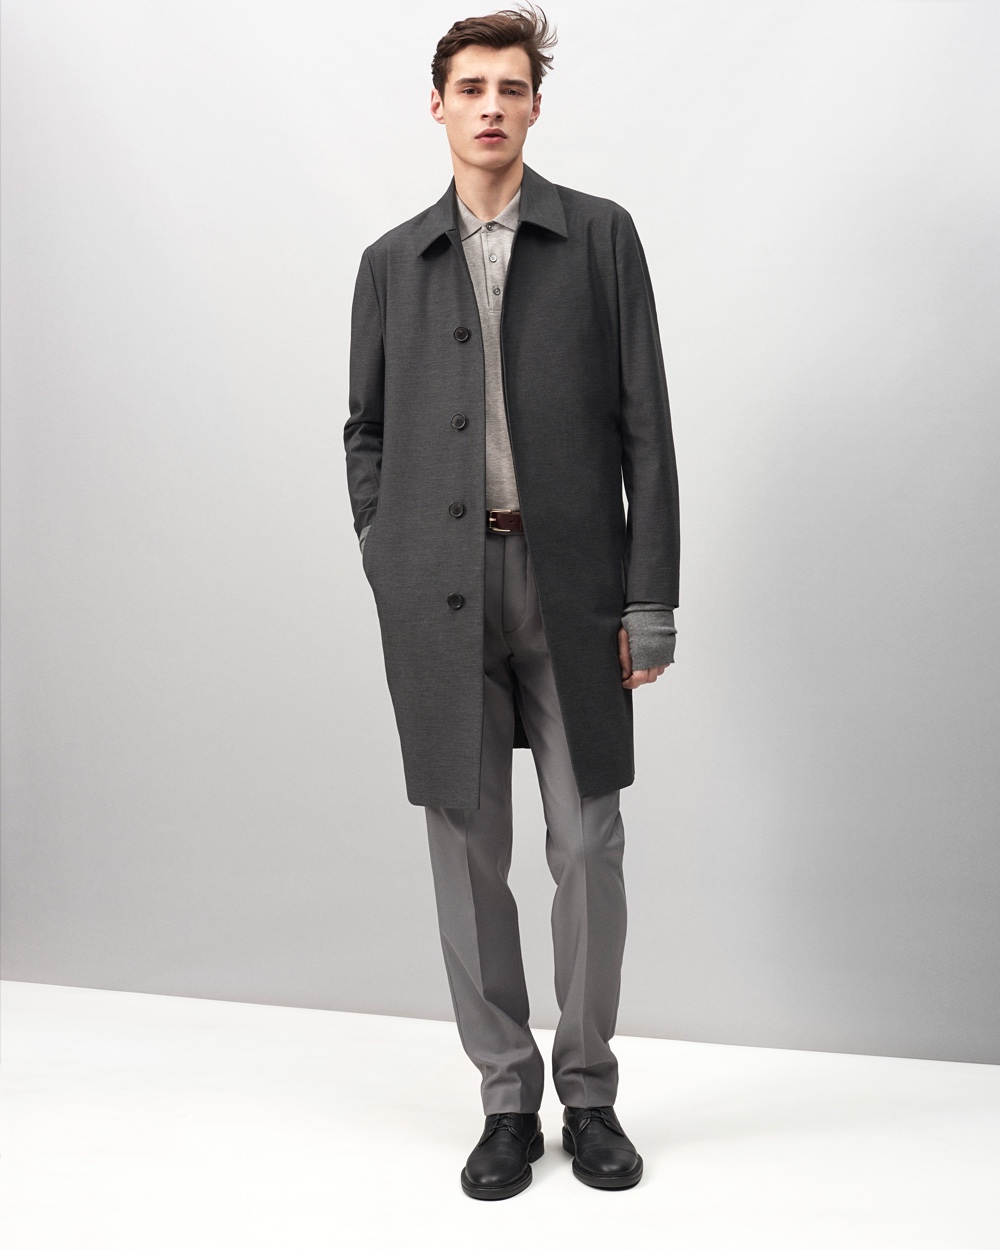 Adrien Sahores Models Theory's Fall/Winter 2015 Collection of Men's Essentials